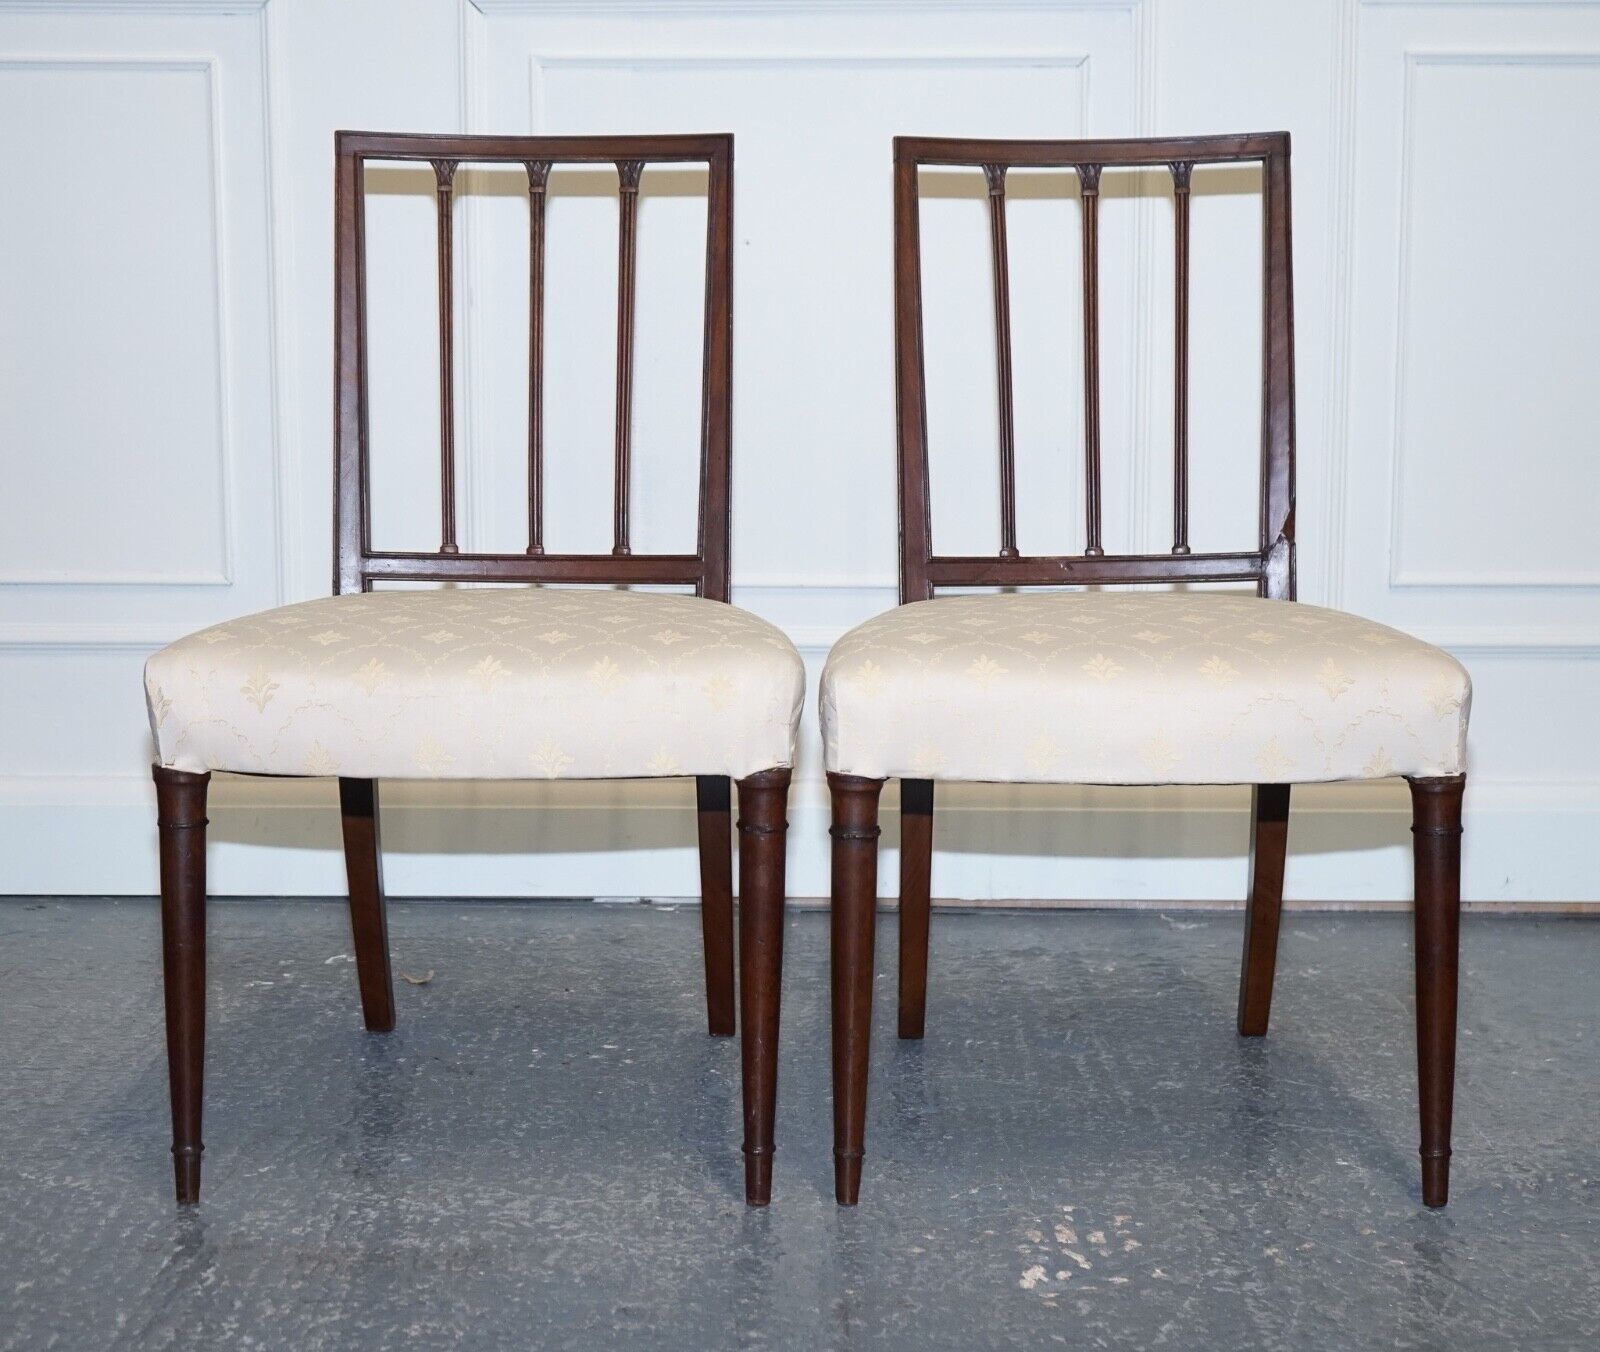 VICTORIAN PAIR OF SIDE CHAIRS WITH CREAM FABRIC SEATS